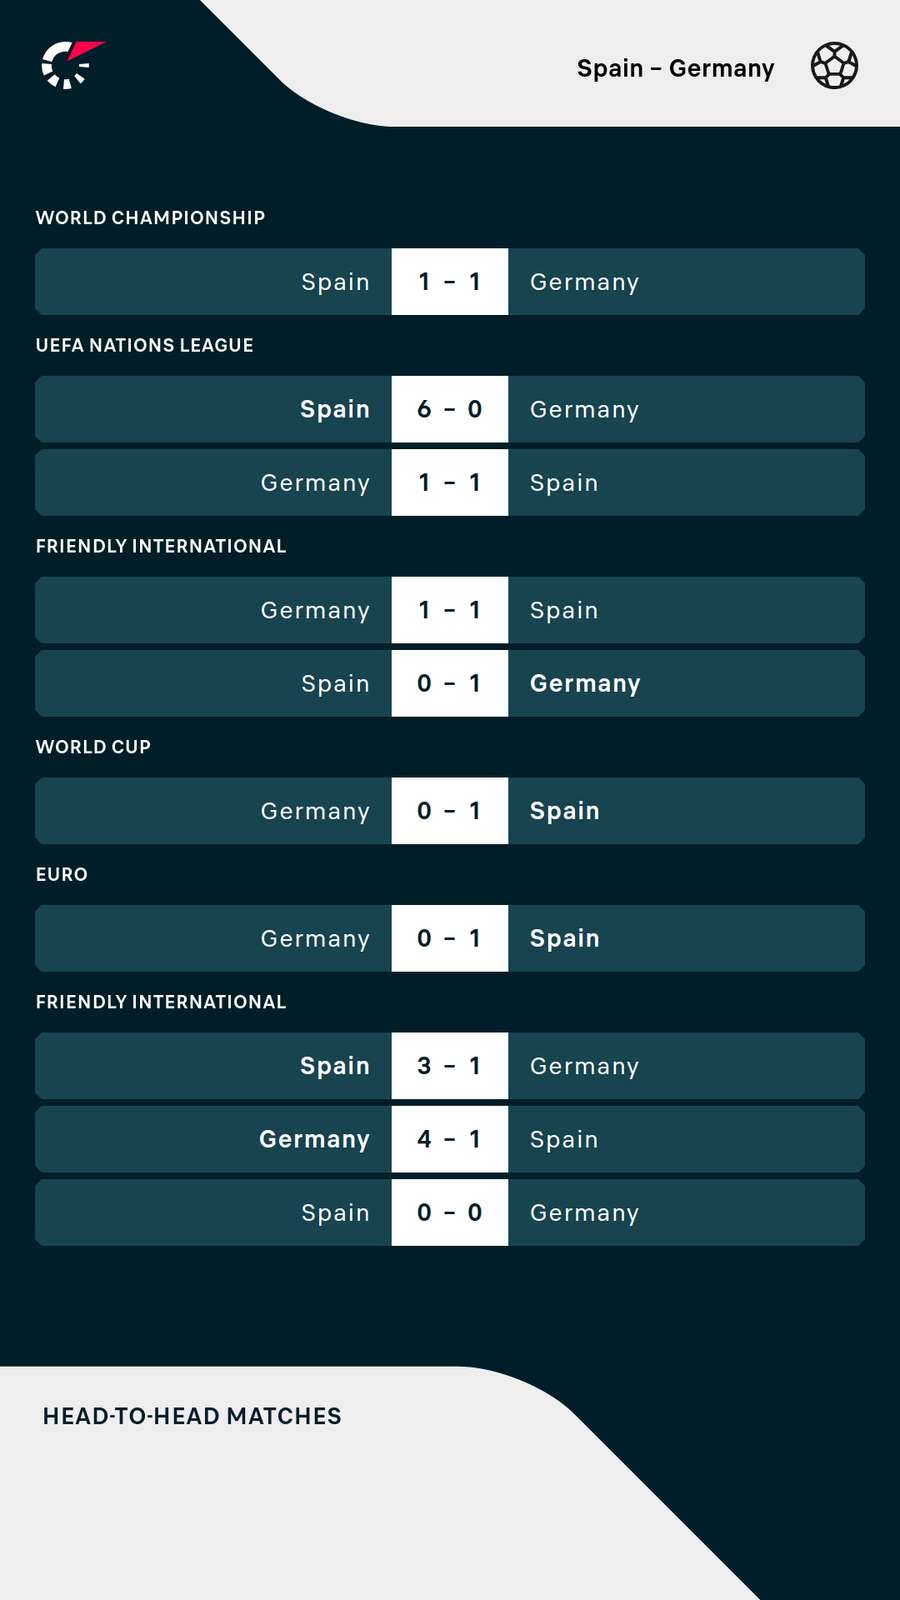 Germany haven't beaten Spain in a competitive match for 36 years